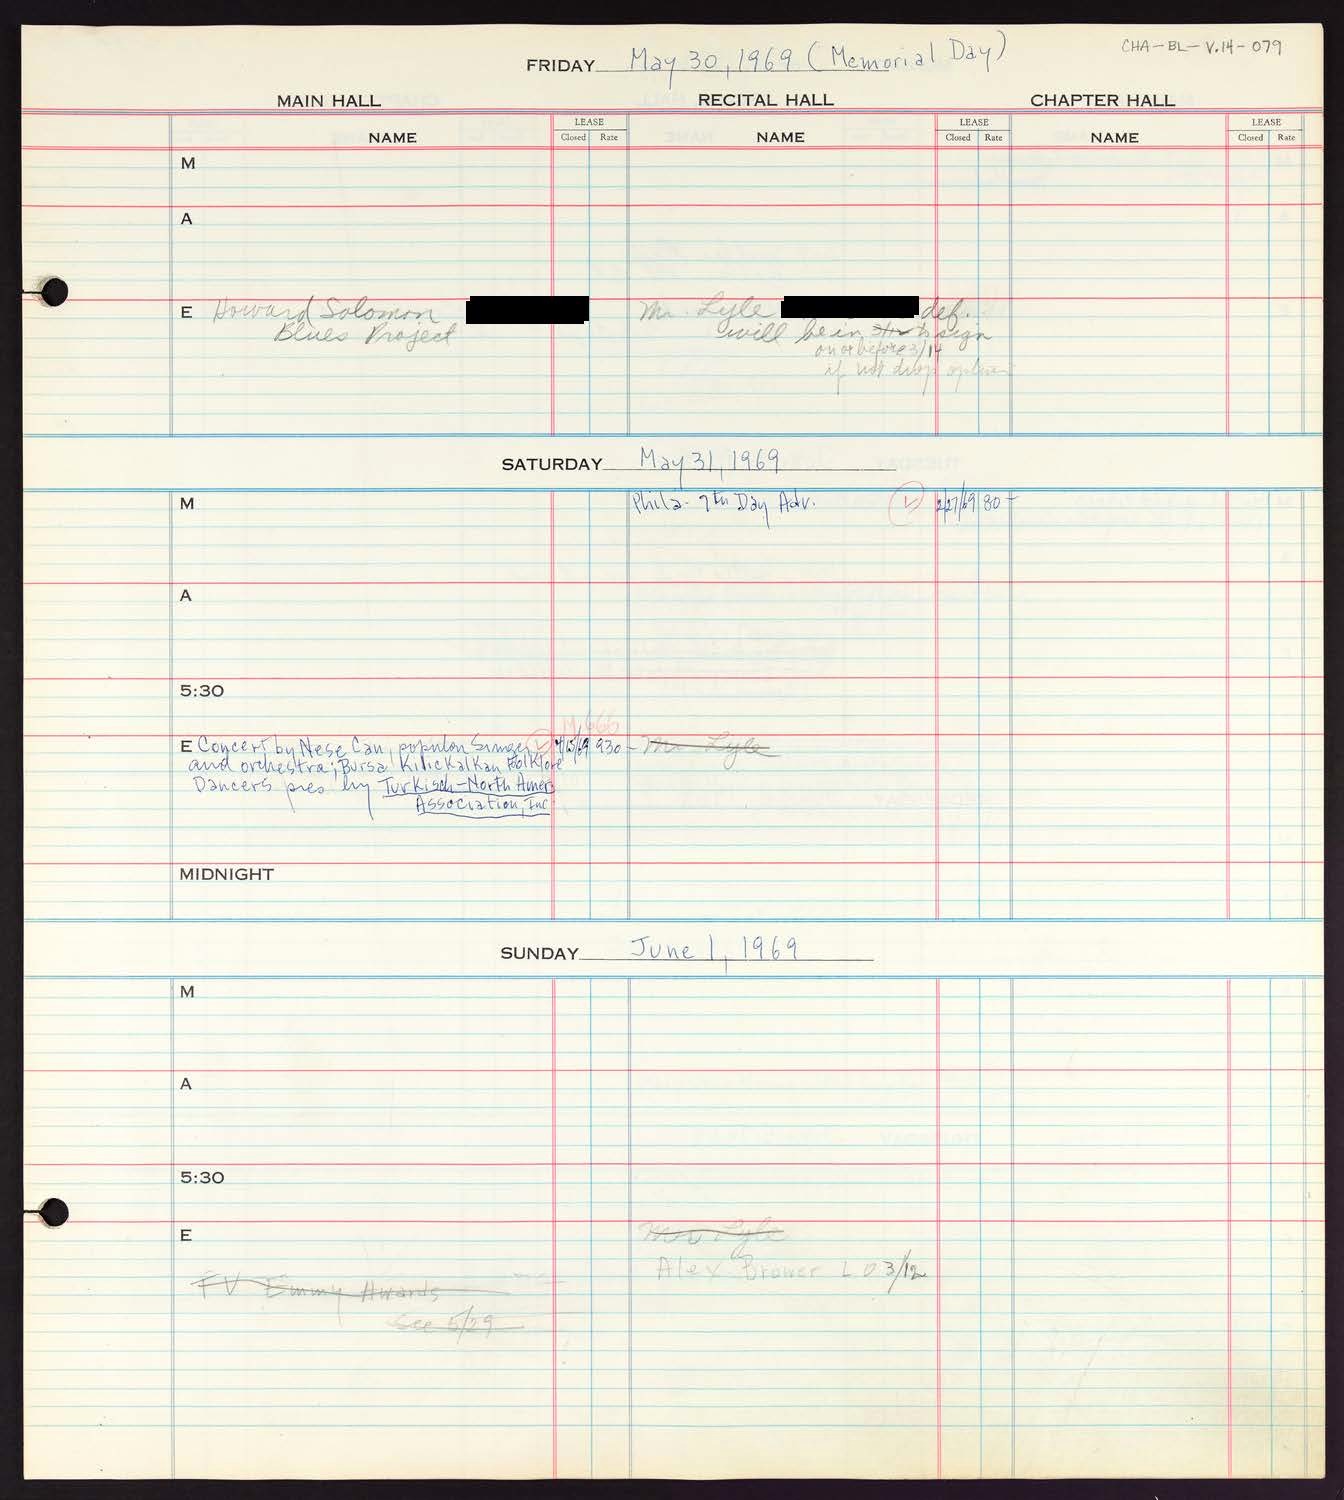 Carnegie Hall Booking Ledger, volume 14, page 79